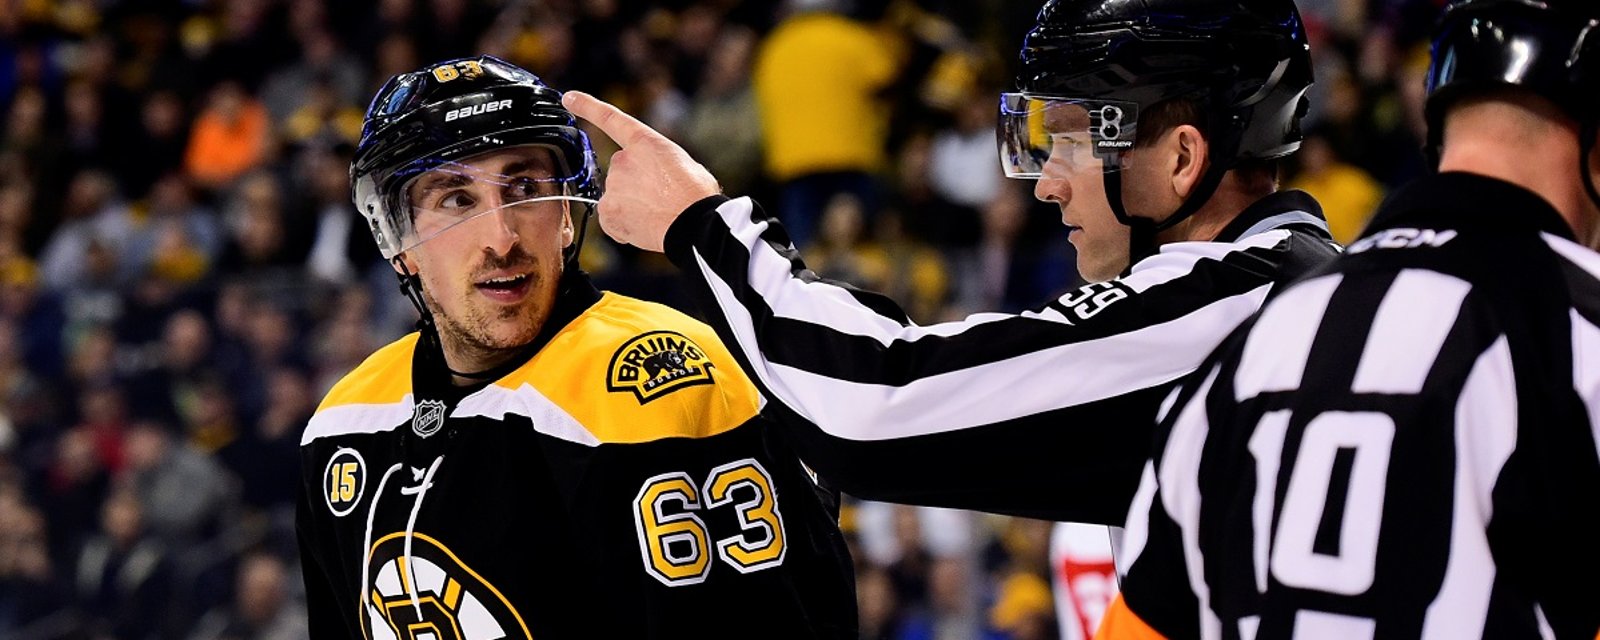 Brad Marchand to avoid discipline after yet another trip from behind.